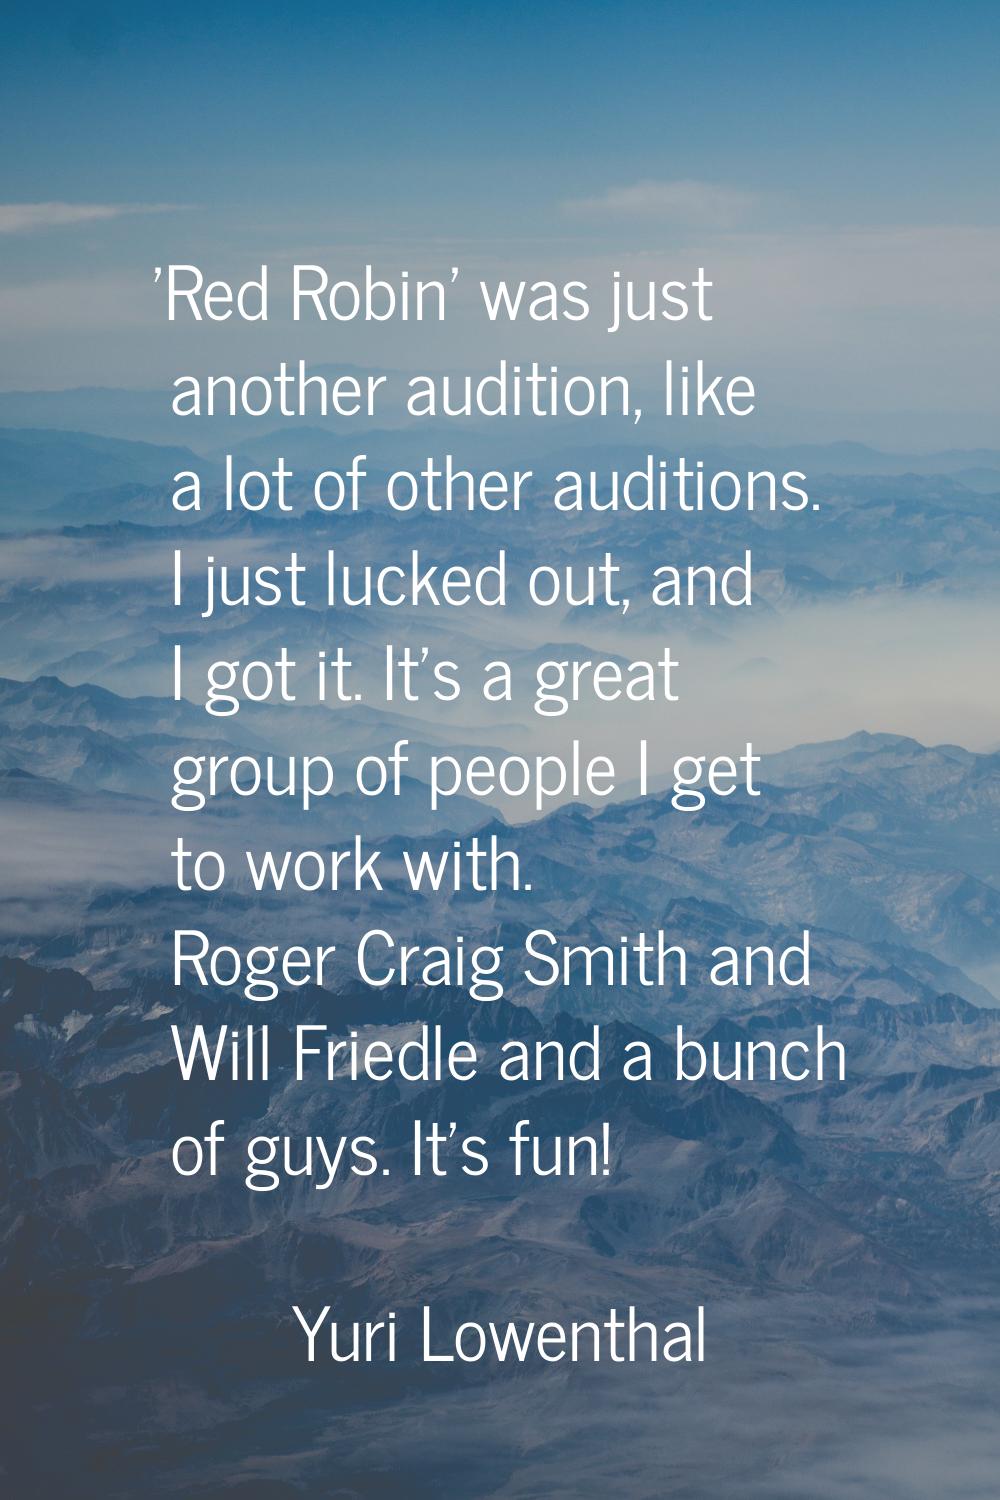 'Red Robin' was just another audition, like a lot of other auditions. I just lucked out, and I got 